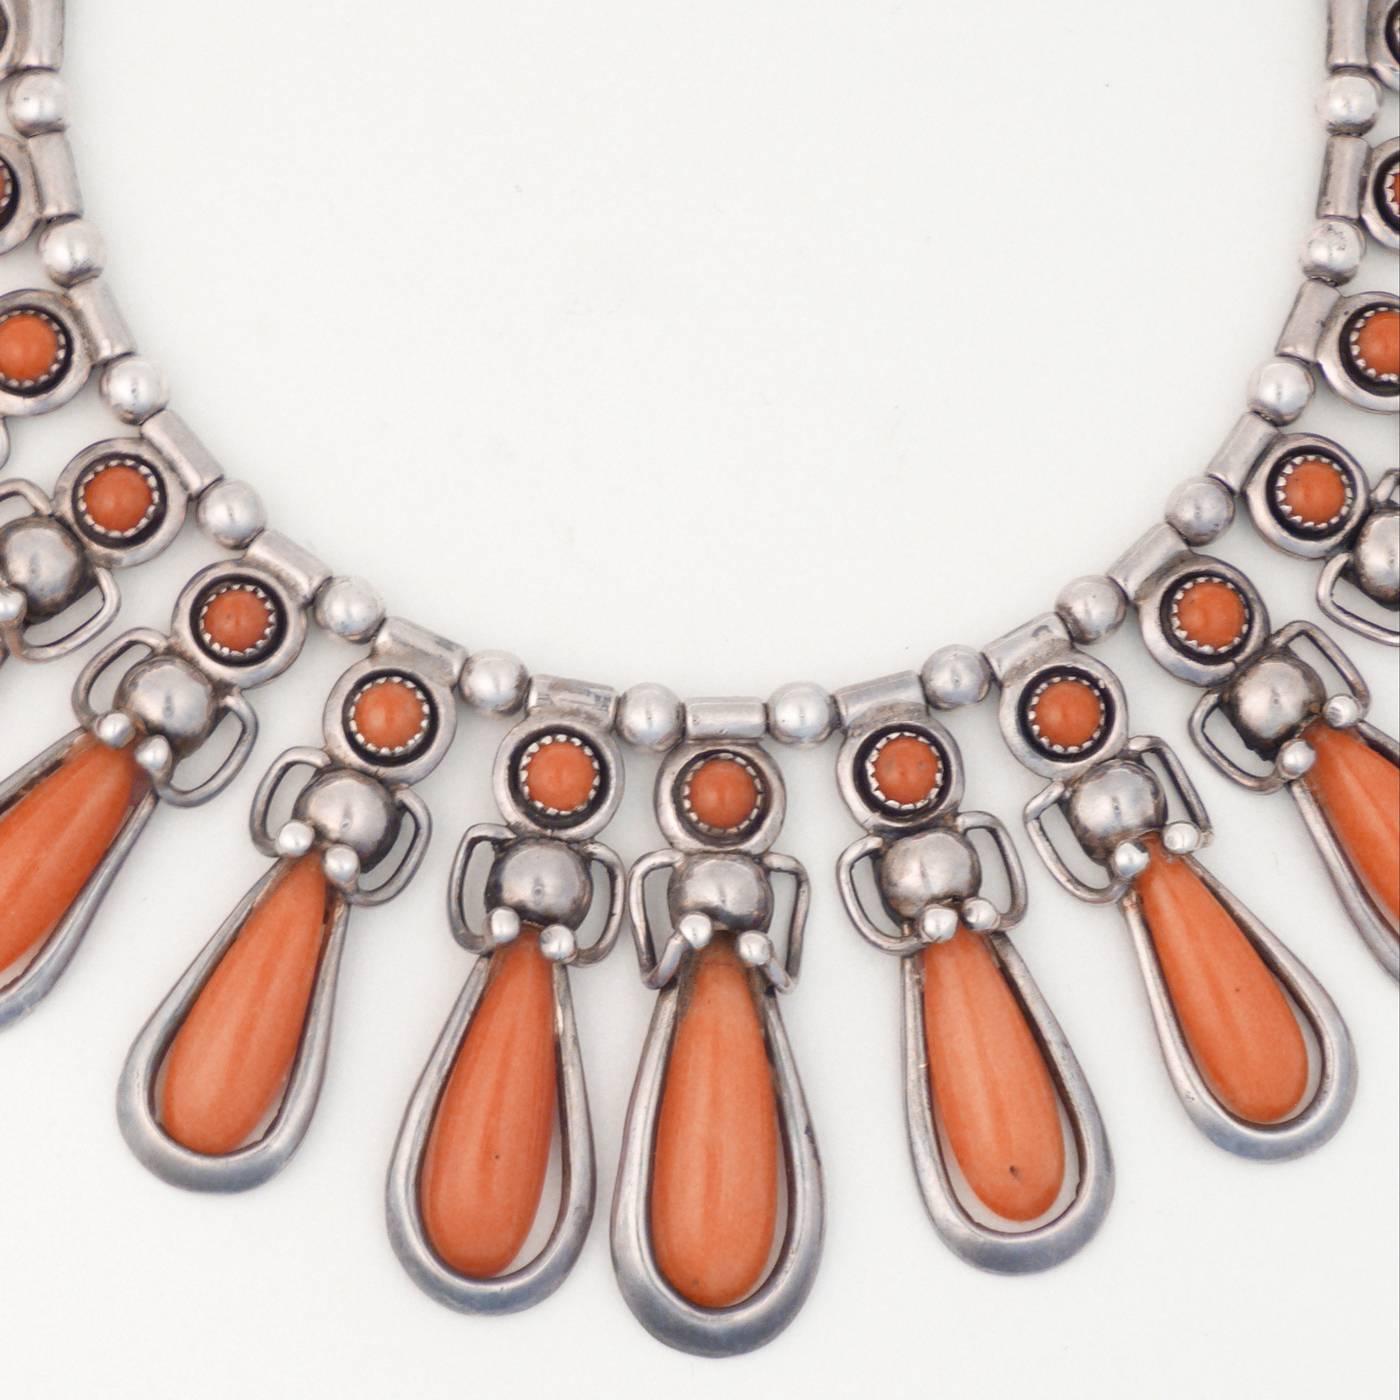 An exquisite coral and sterling silver necklace featuring graduated tear drop shaped pieces of Mediterranean coral. Frank Patania was an Italian immigrant who employed Native American jewelrs in his studio. Clearly stamped on the reverse with his